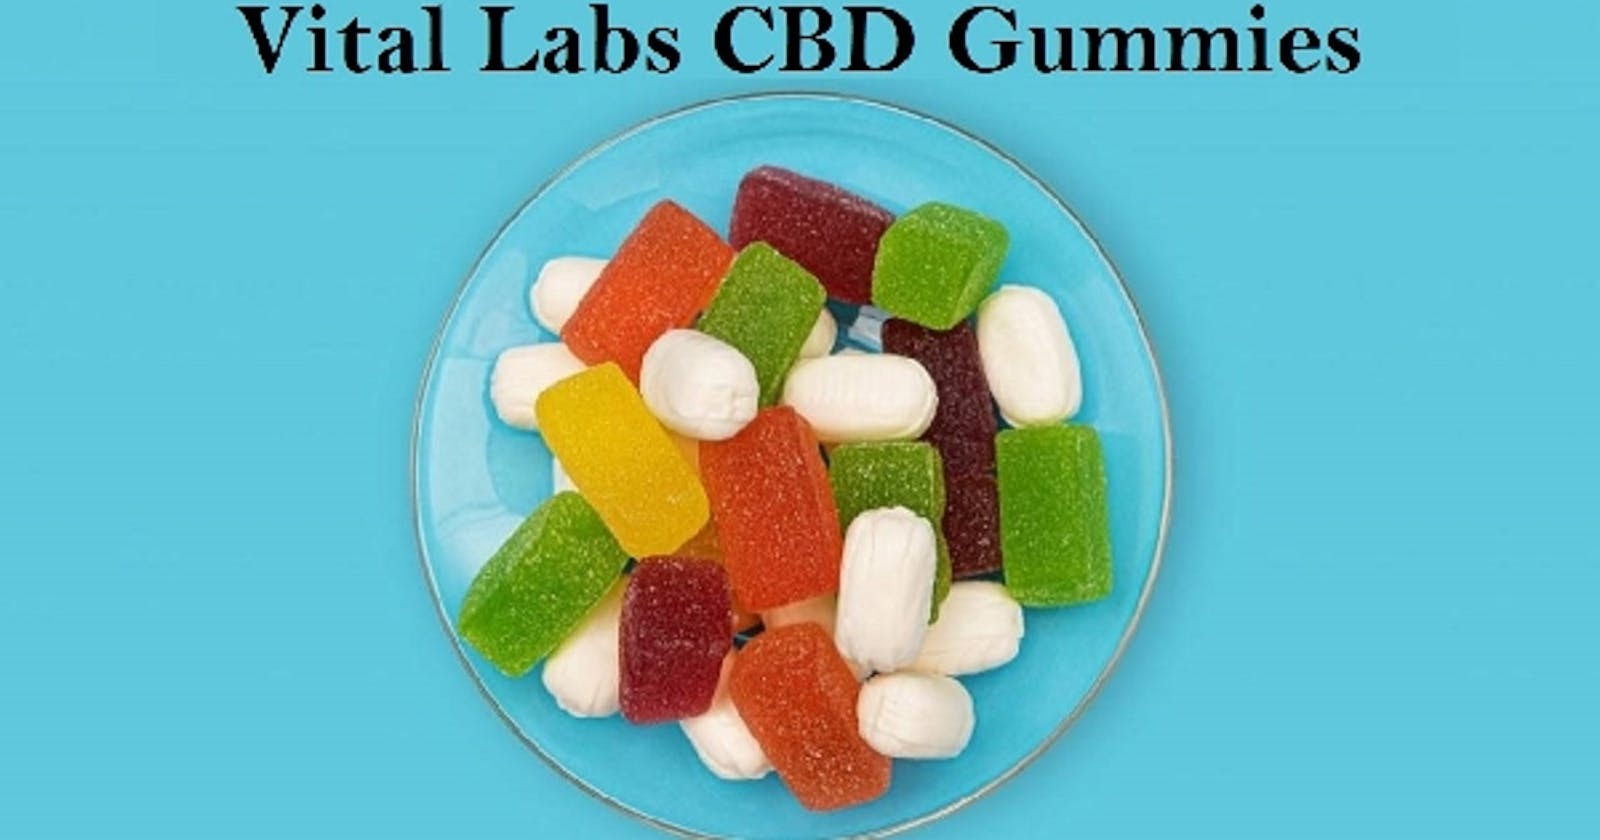 Vital Labs CBD Gummies Against Pain Relief & Where To Buy?